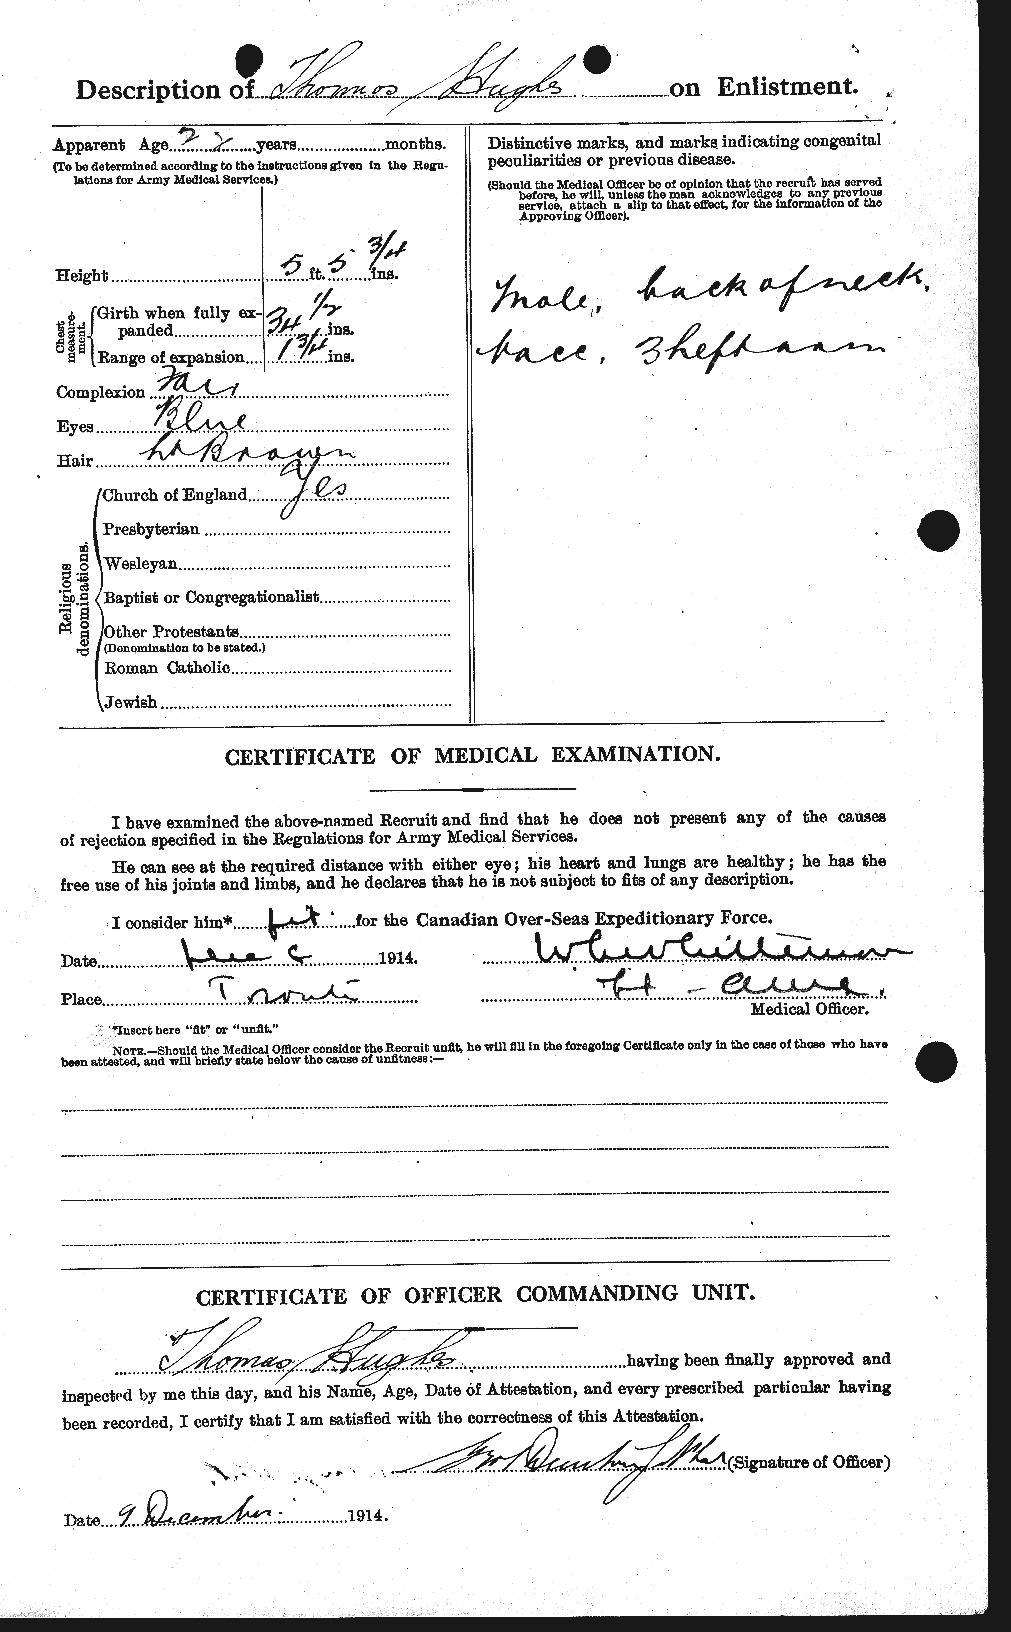 Personnel Records of the First World War - CEF 406667b